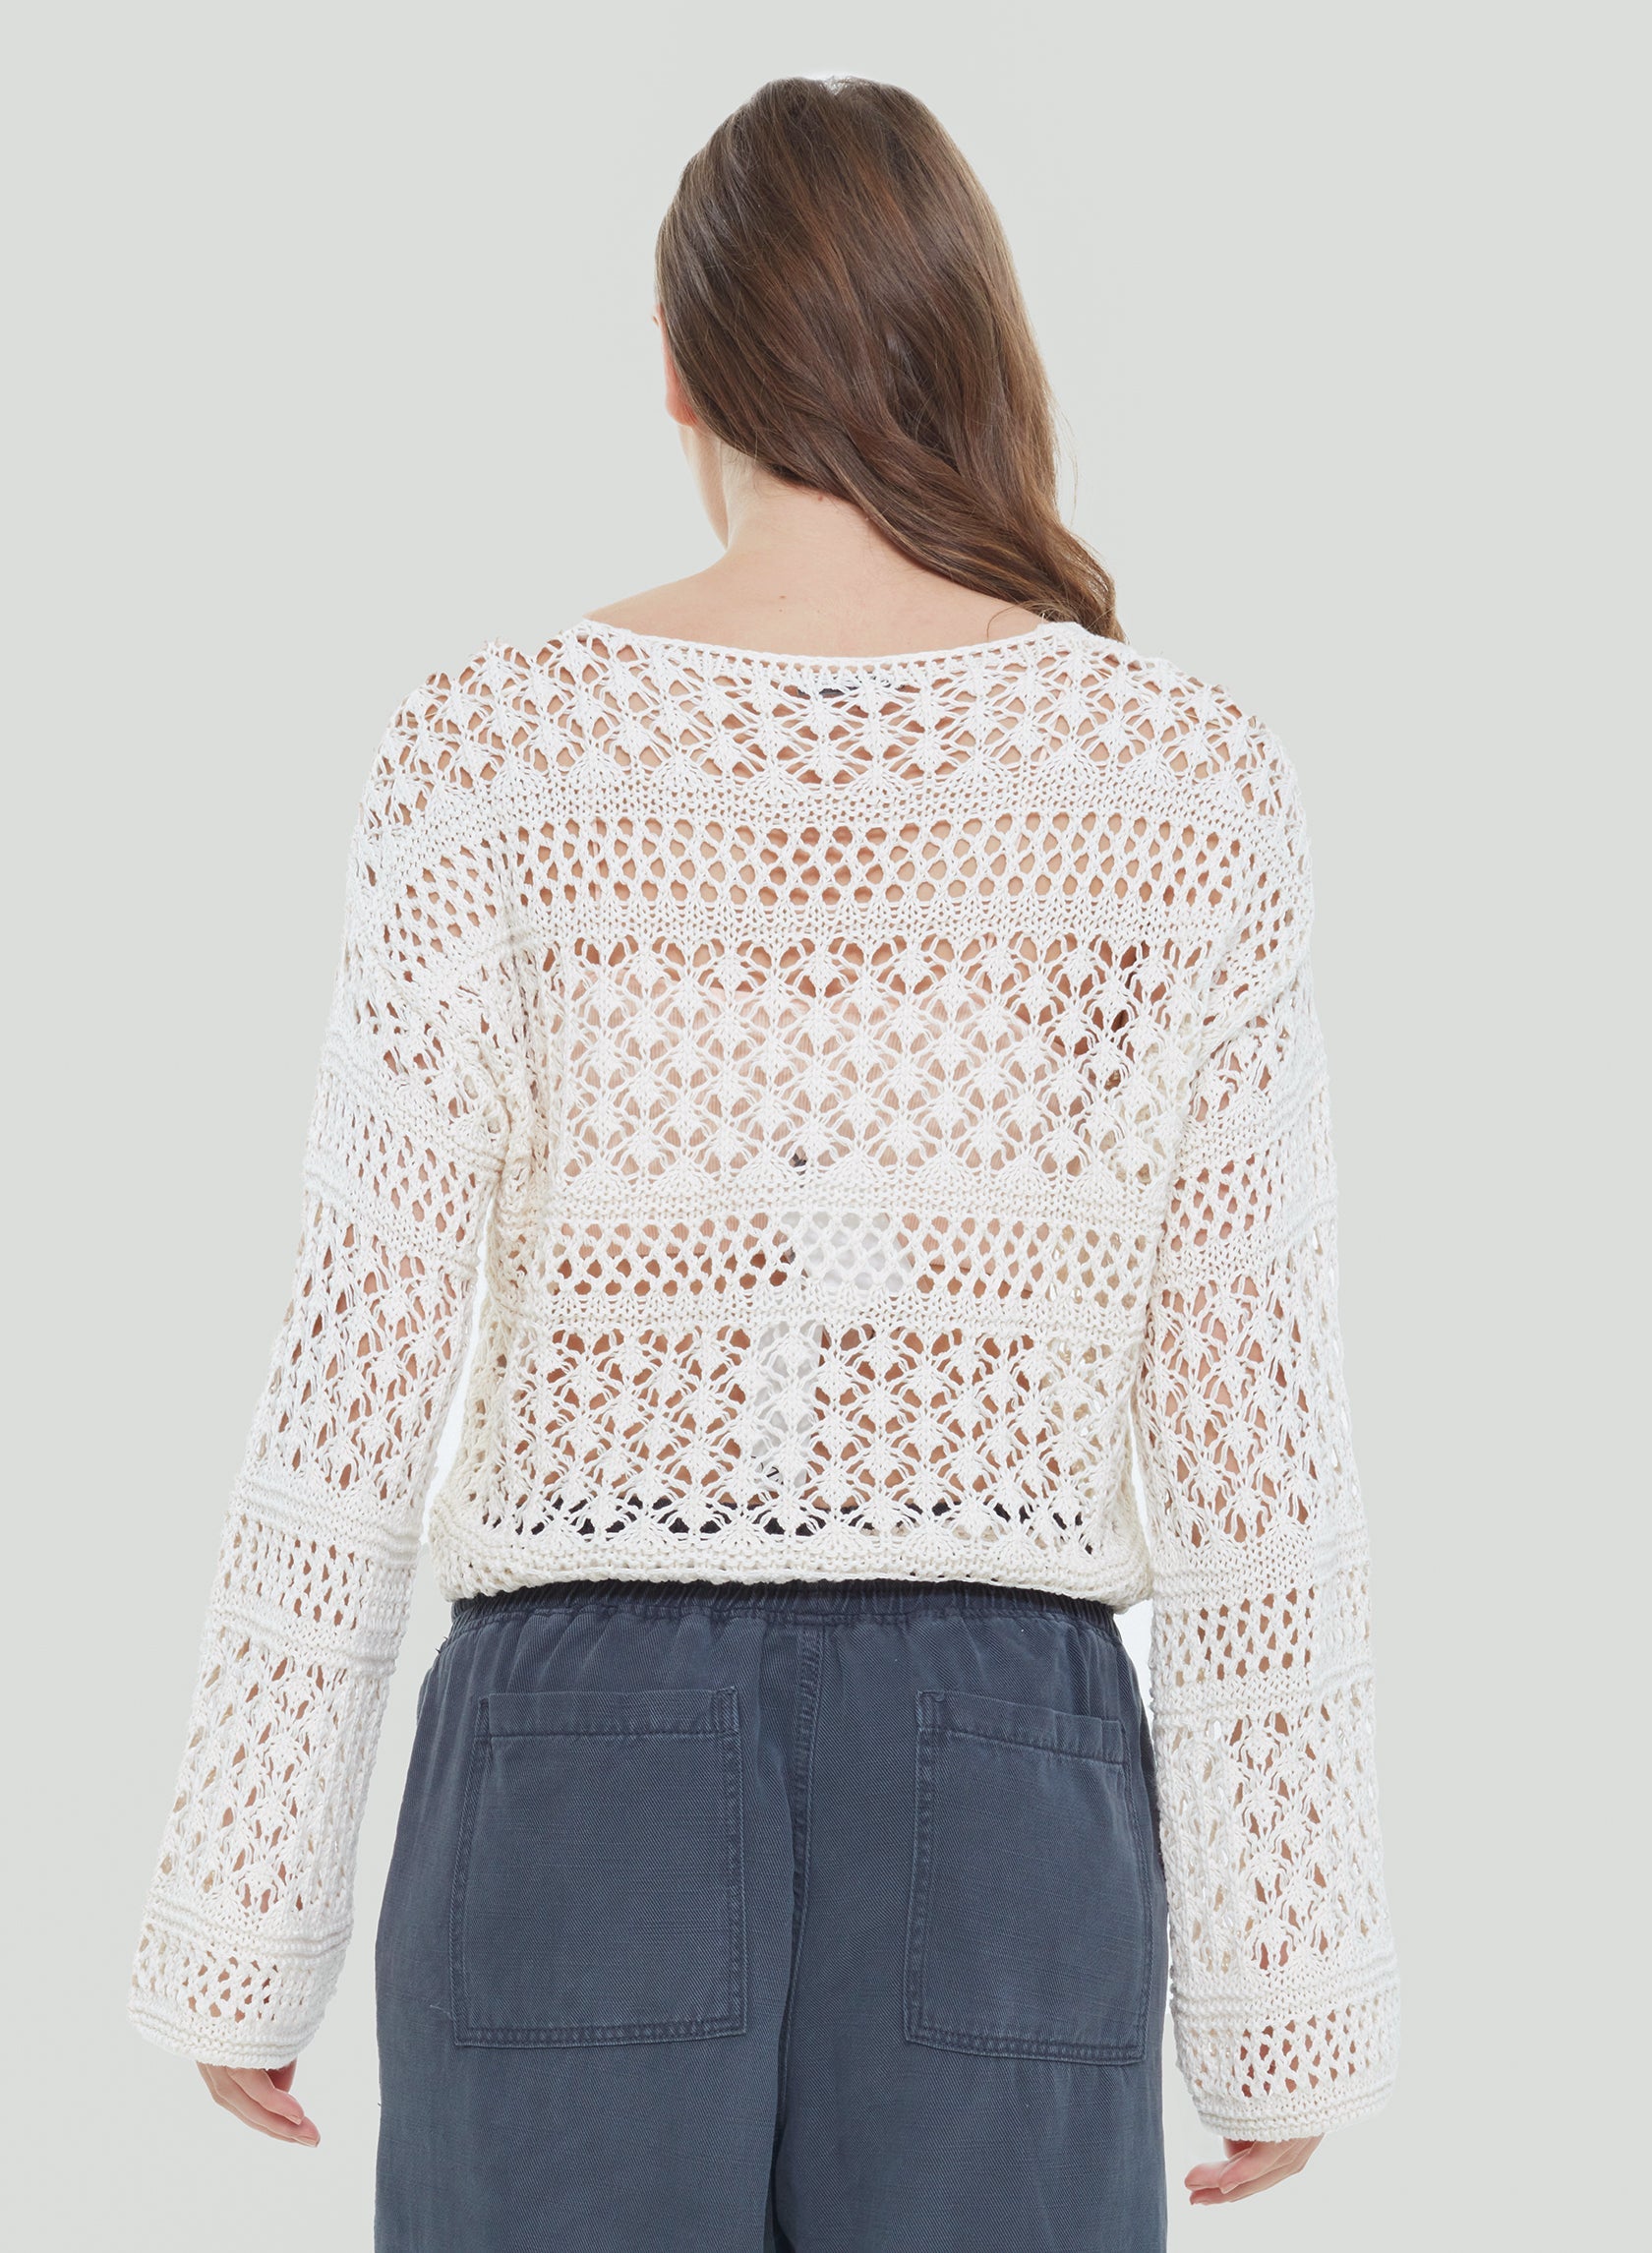 Dex Clothing Lace Up Crochet Off-White Sweater